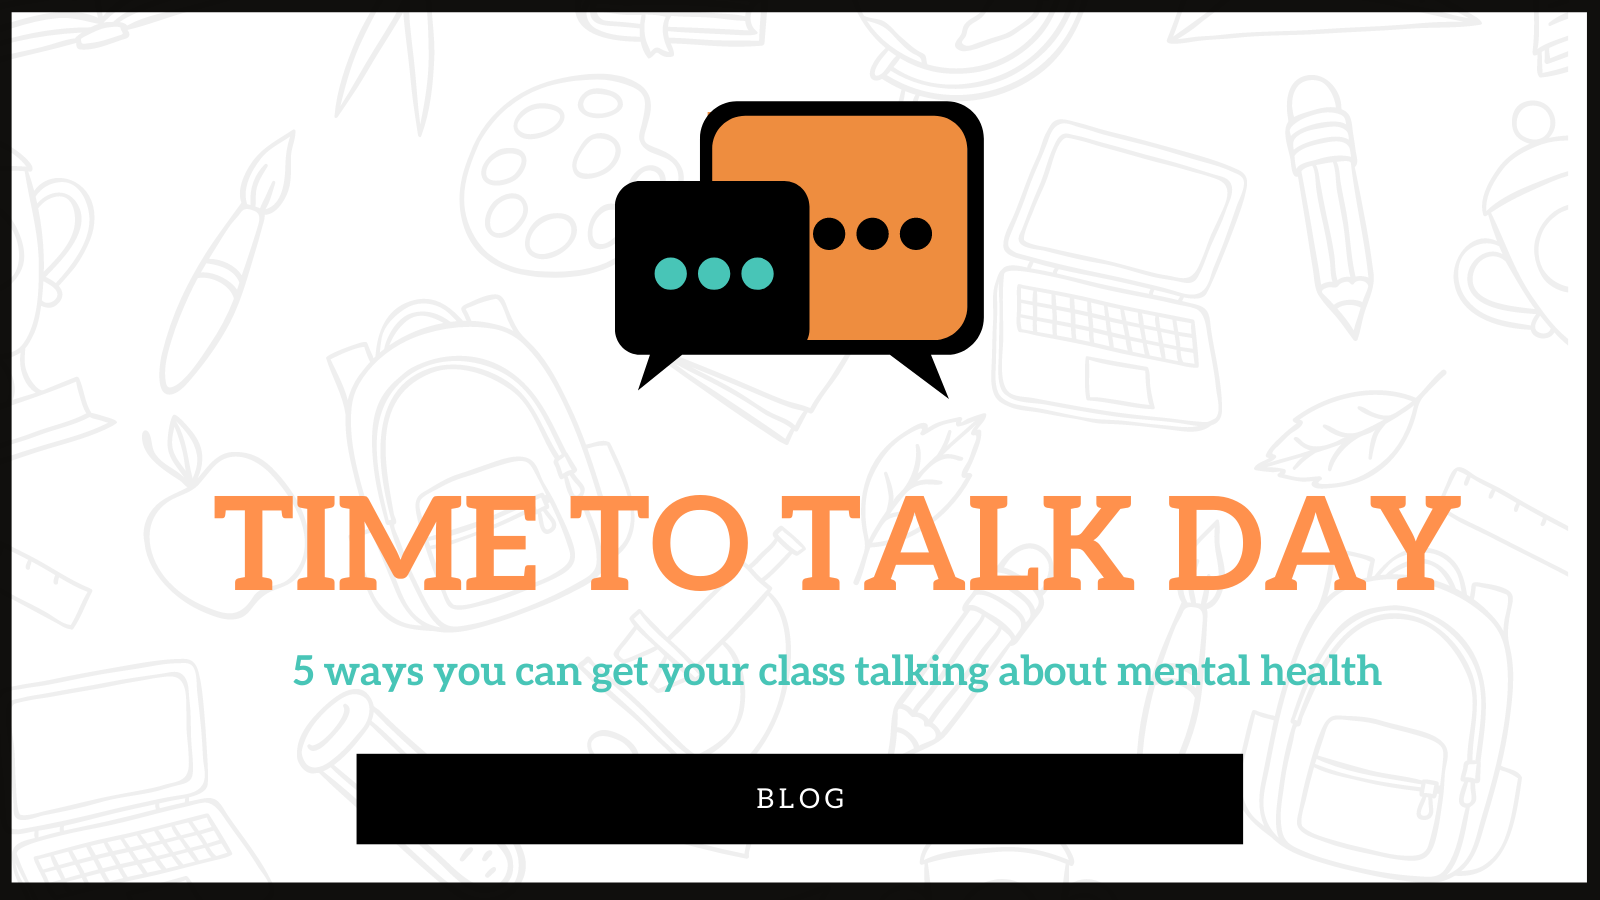 Time to Talk Day: 5 ways you can make time to talk with your class.